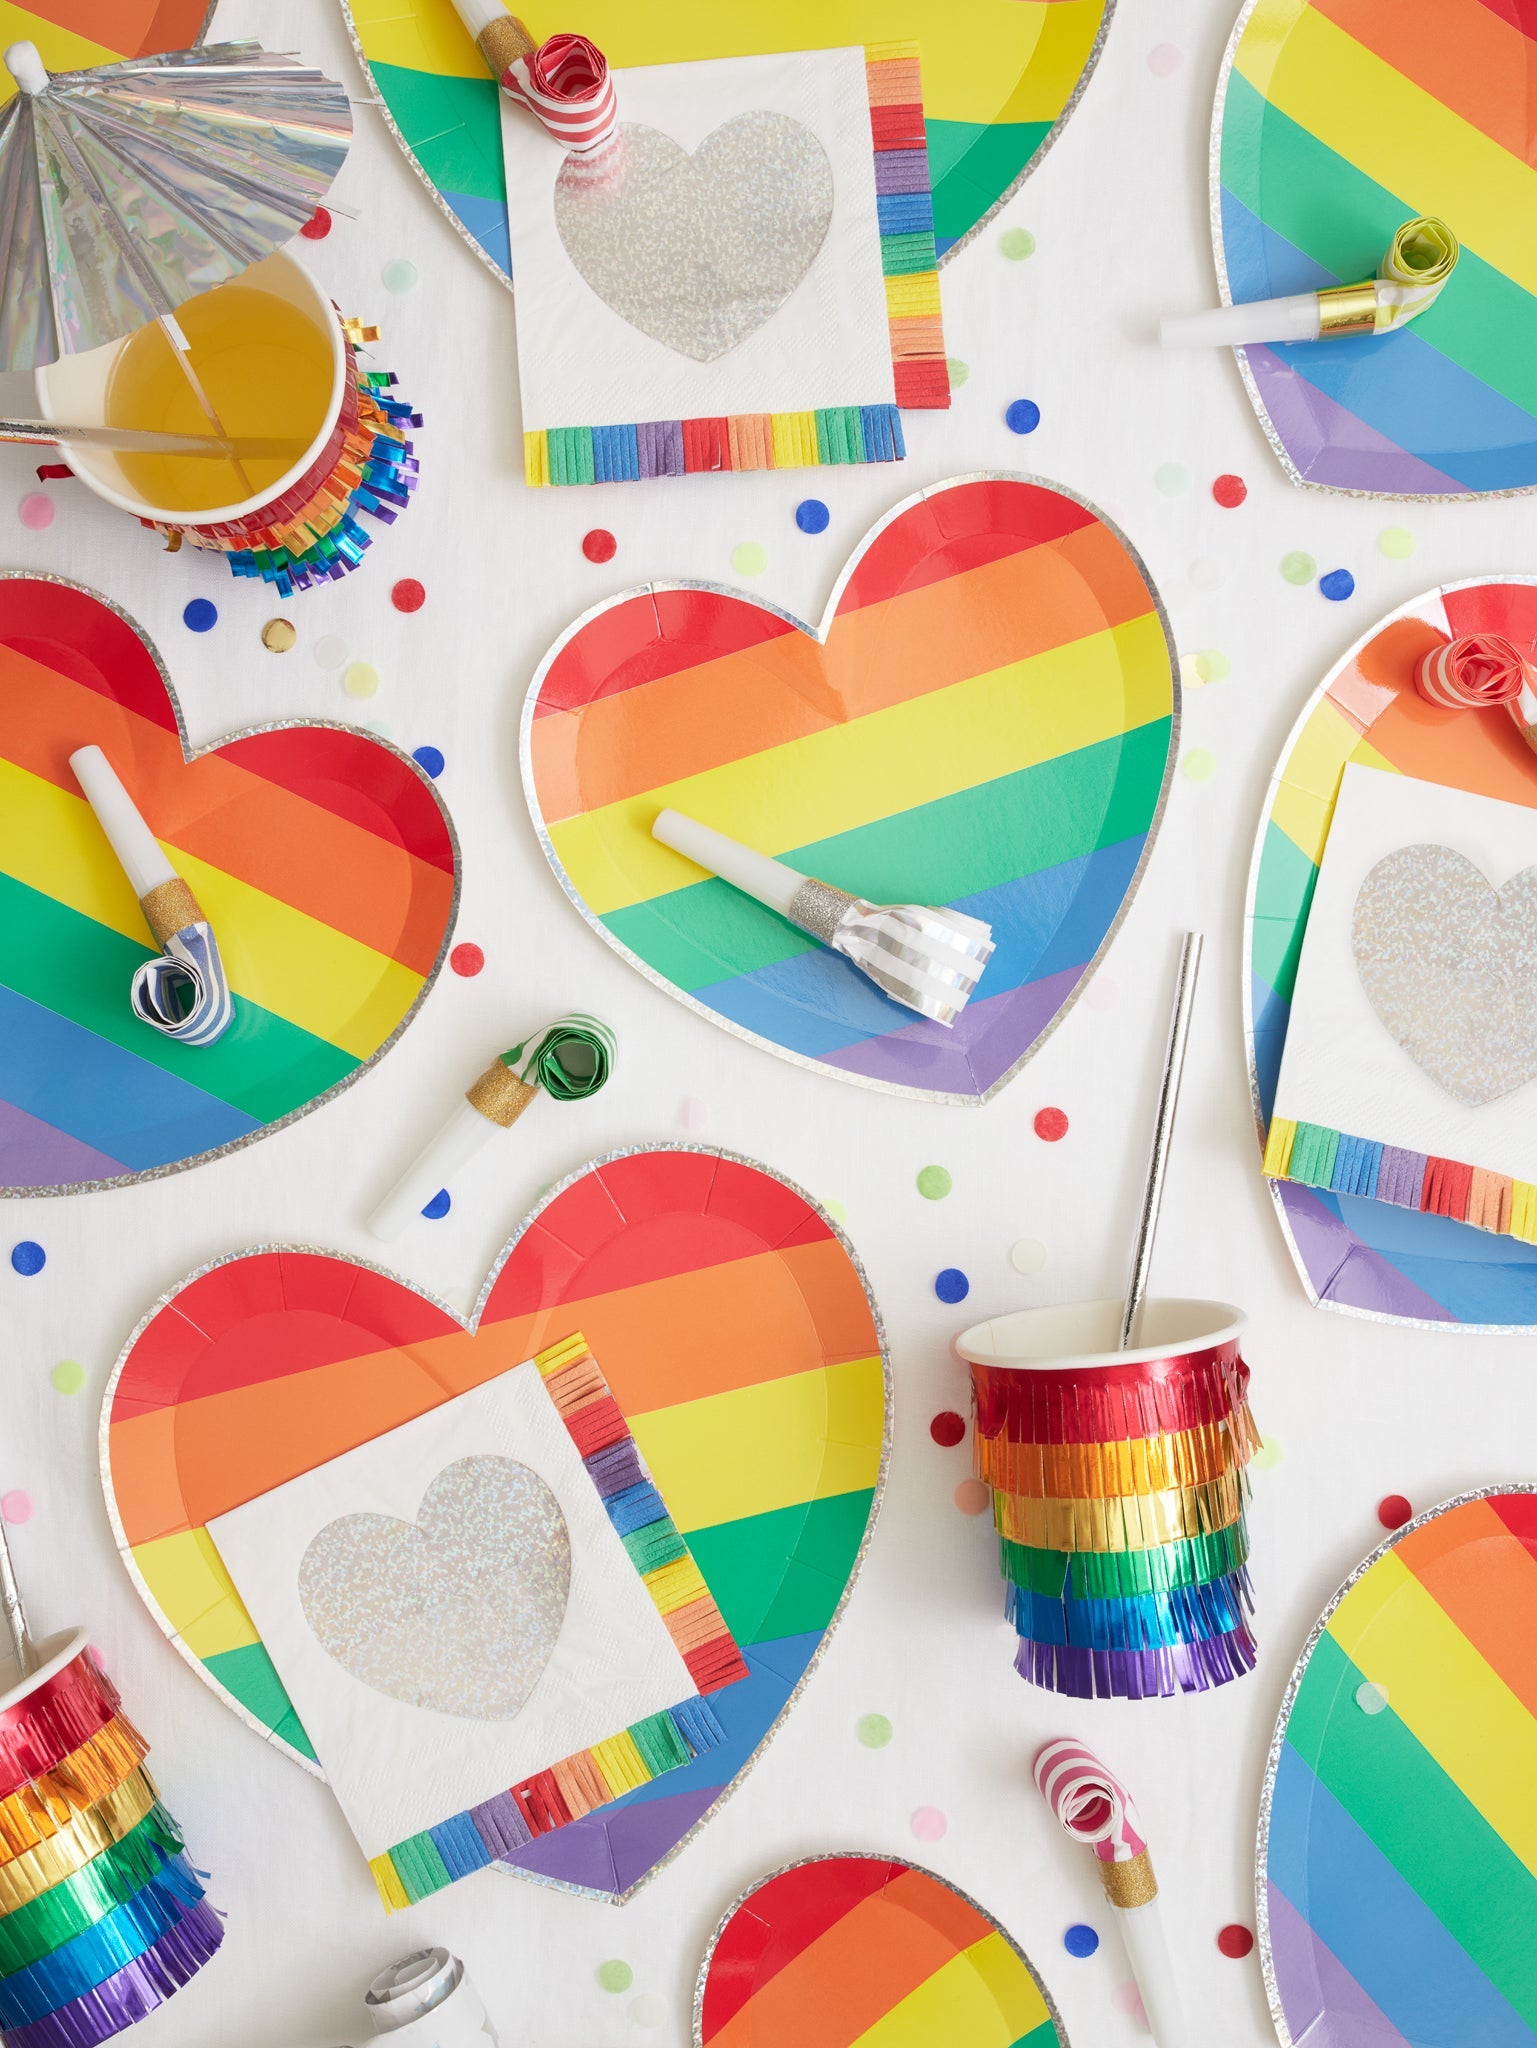 Add some whimsy to your tablescape with these beautiful rainbow party supplies! And it's not all about the table, we have rainbow balloon kits, candles, and treat cups to complete your party setup.